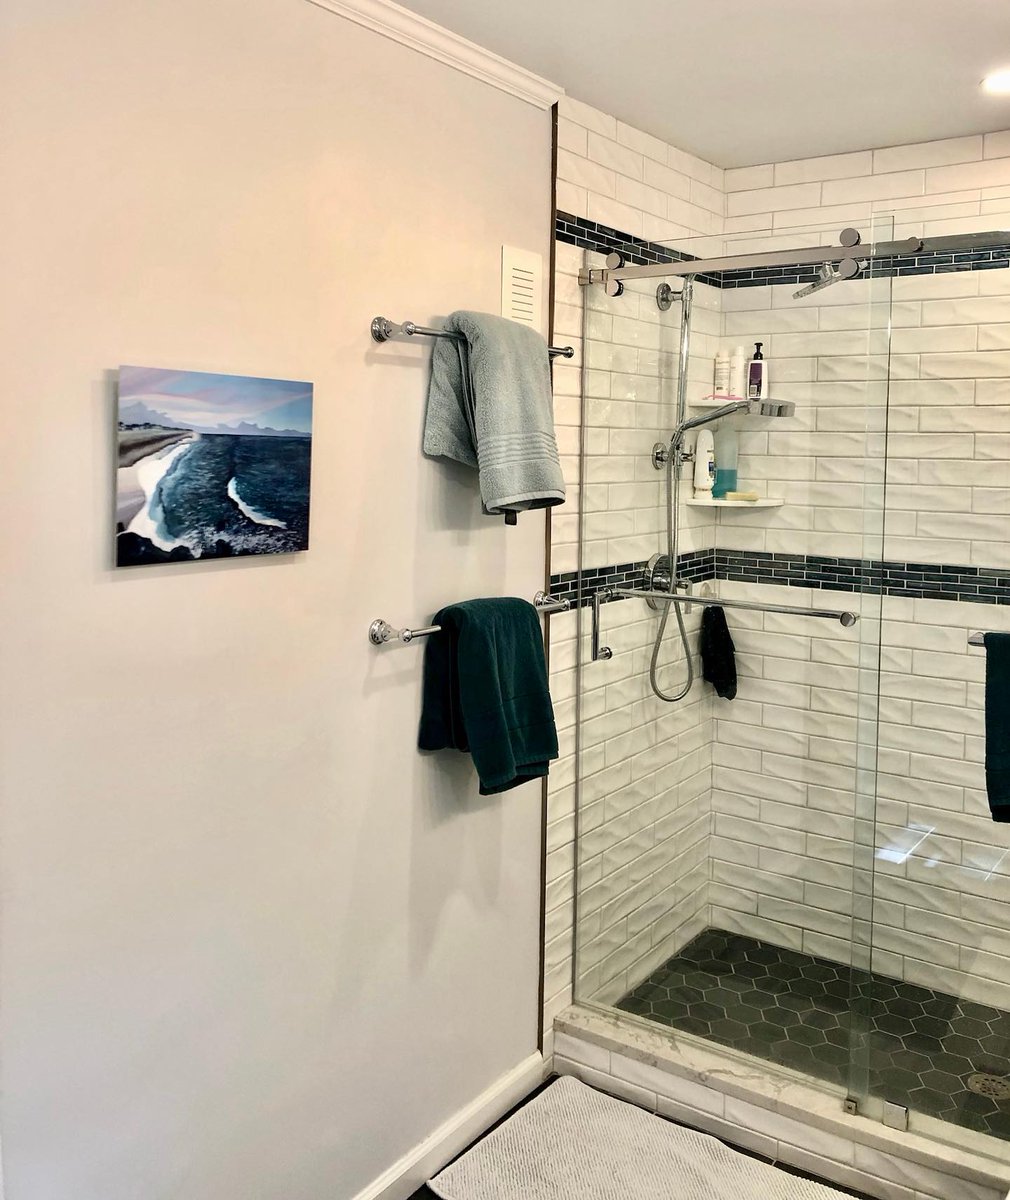 Thank you chamababy7 for sending me a photo of “View from the Jetty” in your fabulous bathroom. So happy 😀 #metalprint #jerseyshore #oceanart #beachhousedecor #bathroomart #artistwin #printondemand